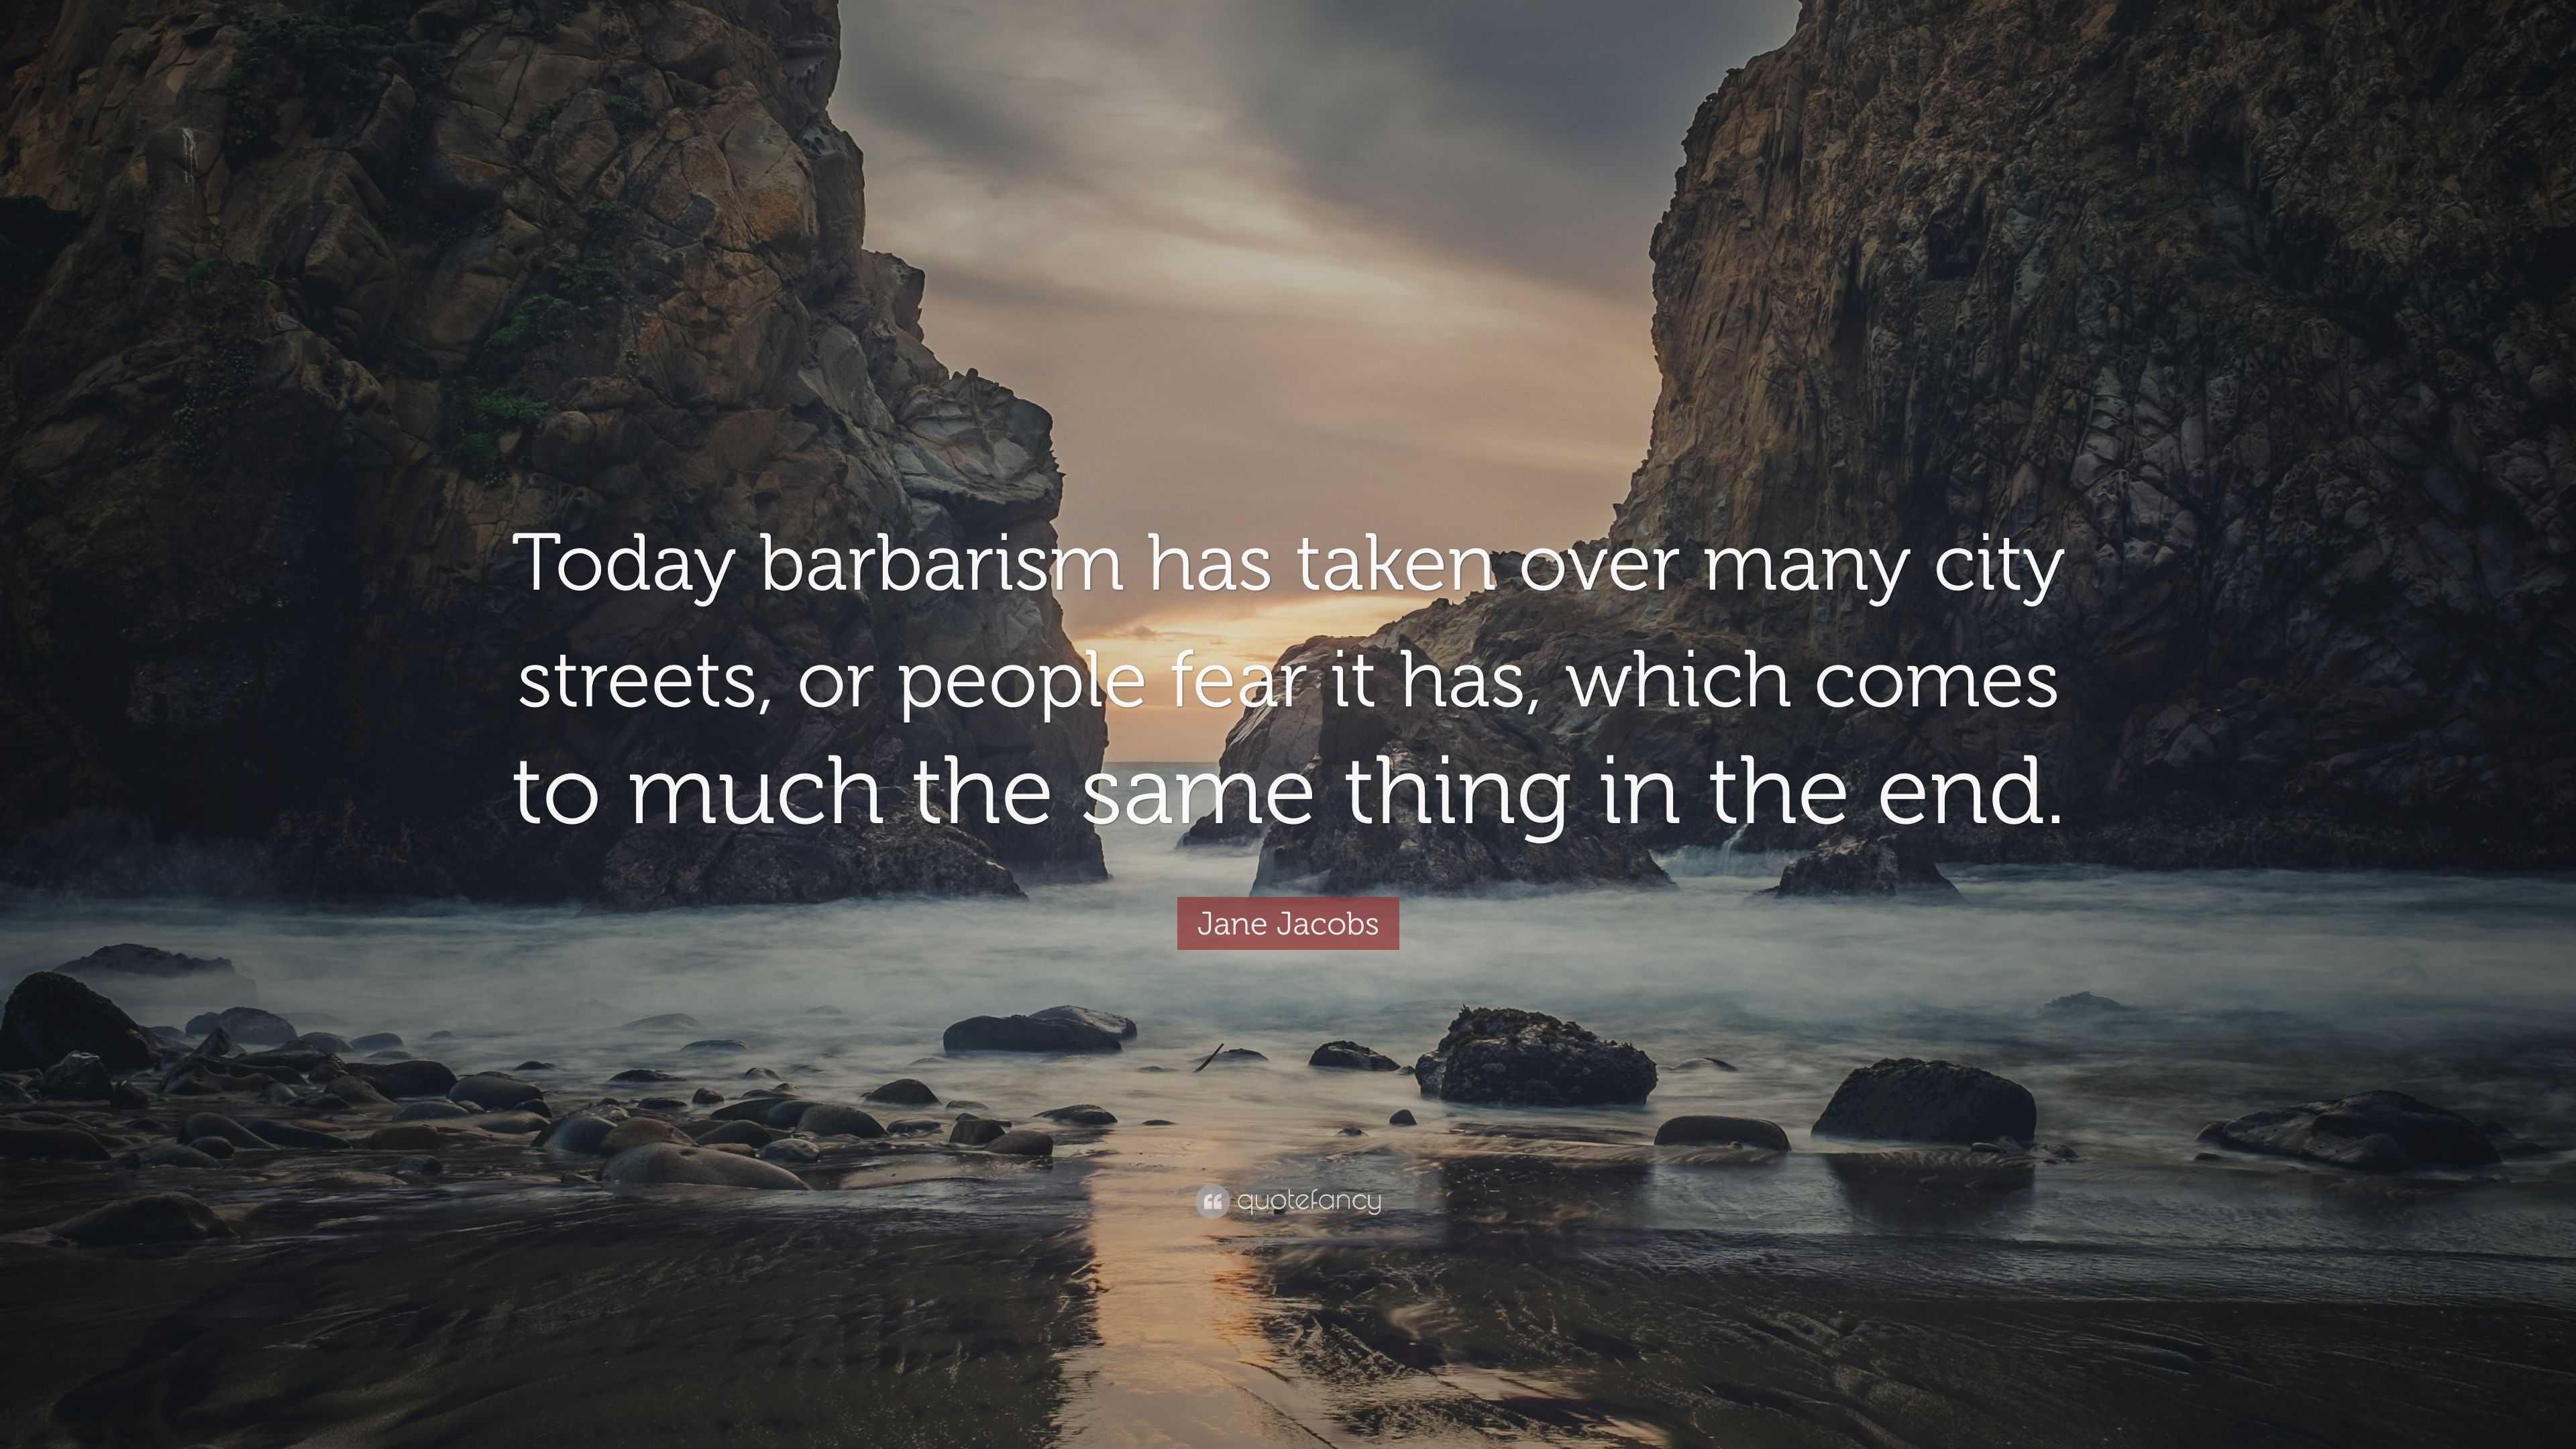 Jane Jacobs Quote: “Today barbarism has taken over many city streets